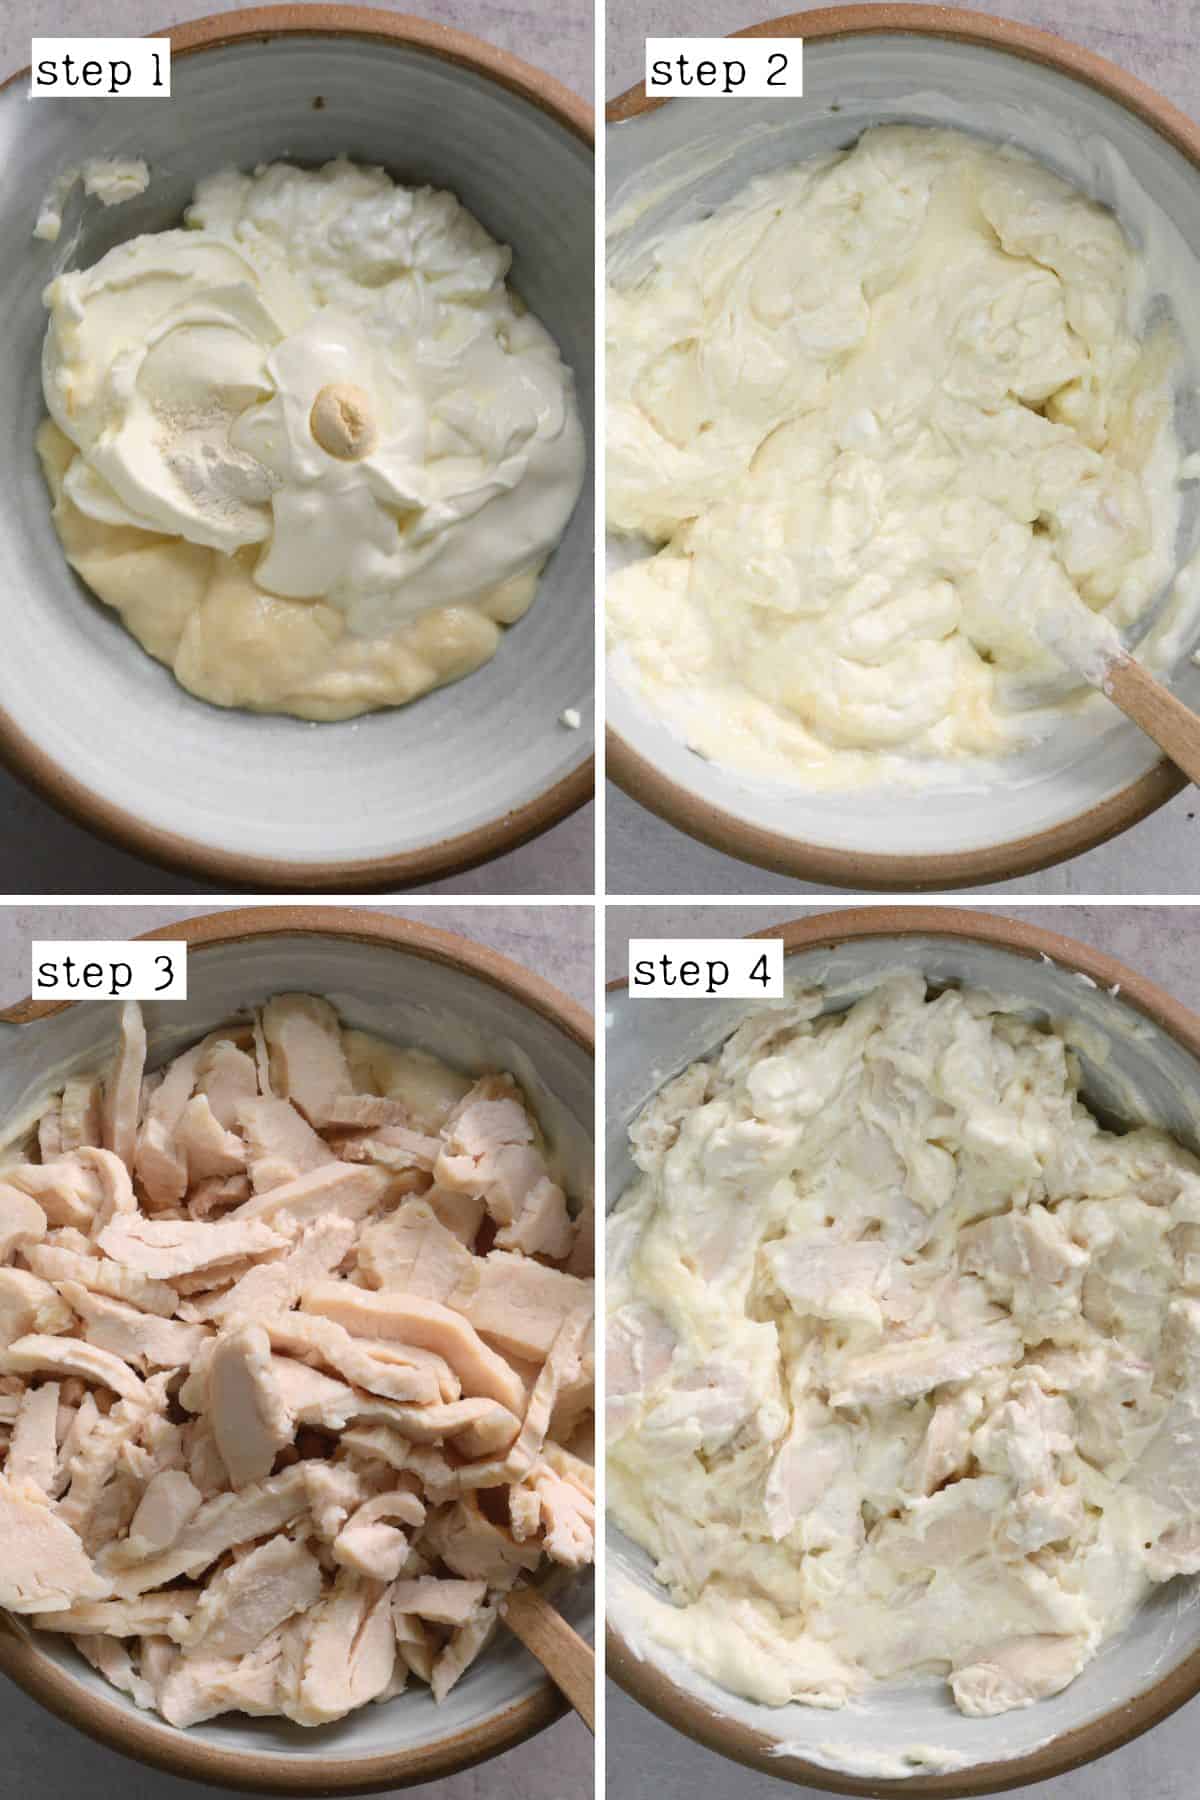 Steps for mixing cream cheese, seasoning, and chicken